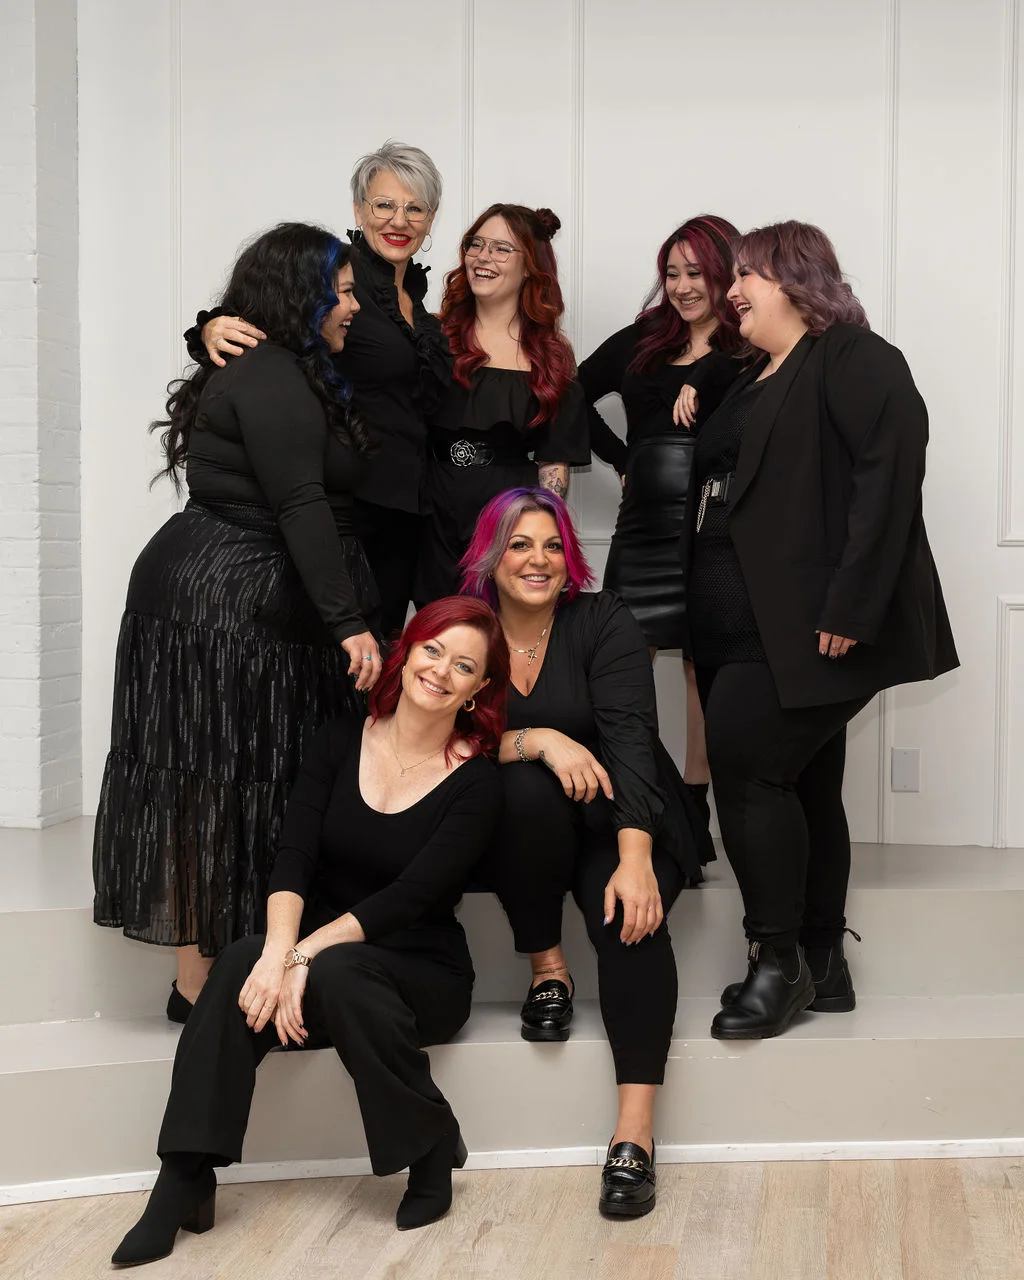 A group of seven smiling women in black attire, fresh from a cosmetology school, posing together indoors.